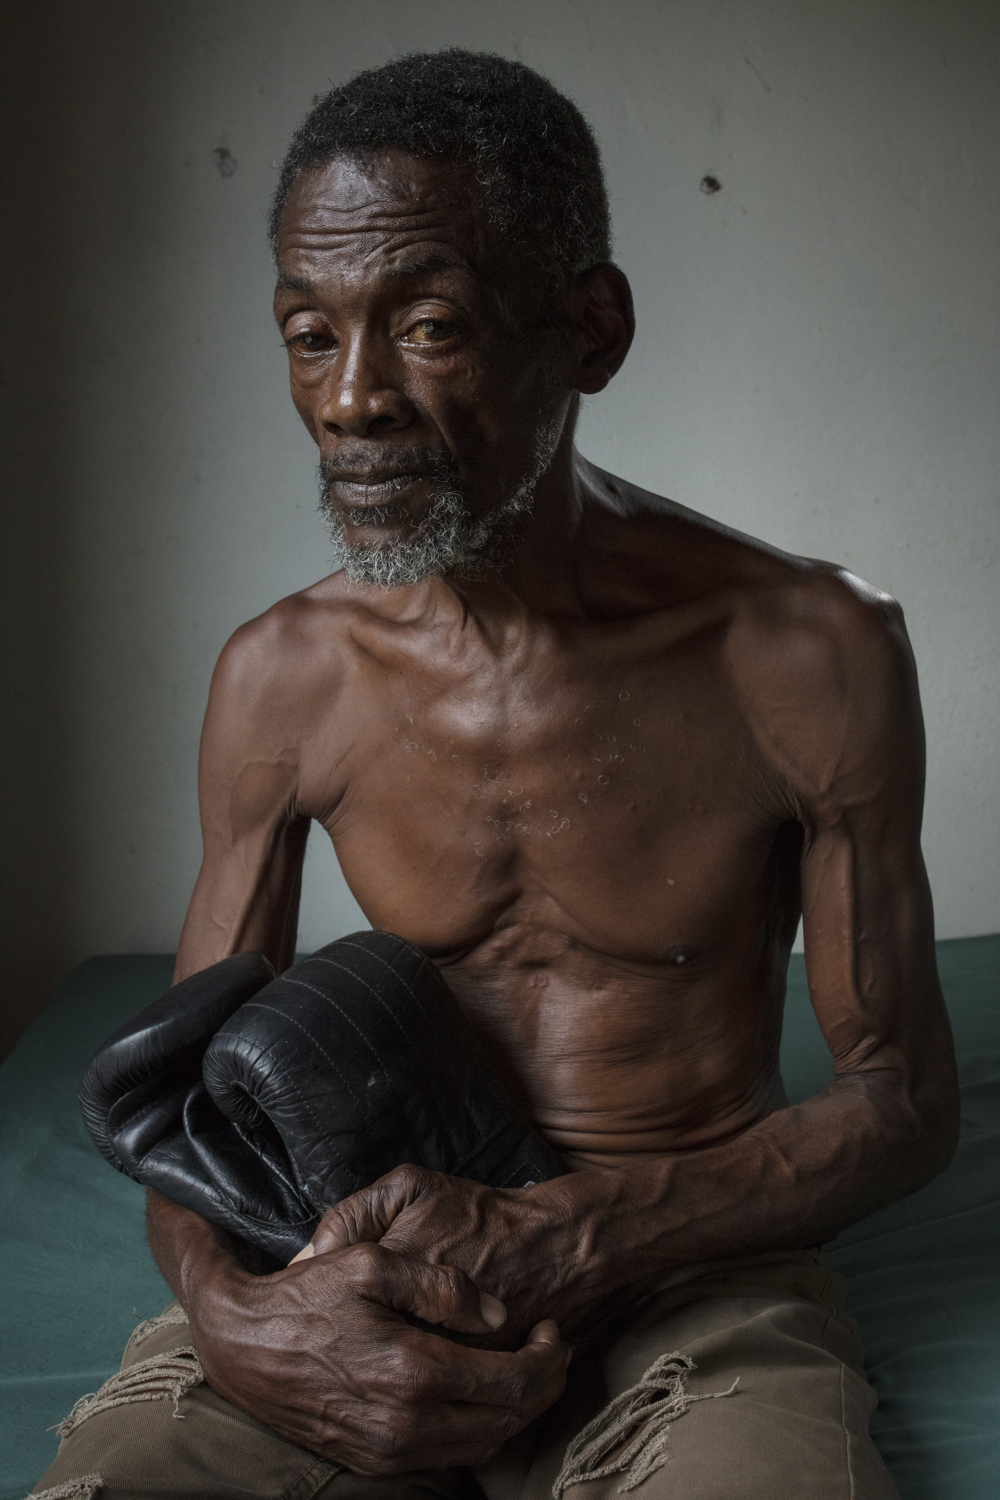 Vernon Vanriel, a former boxer and victim of the Windrush scandal, at his home in Savanna-la-Mar, Jamaica, 2018. Photograph by David Levene.